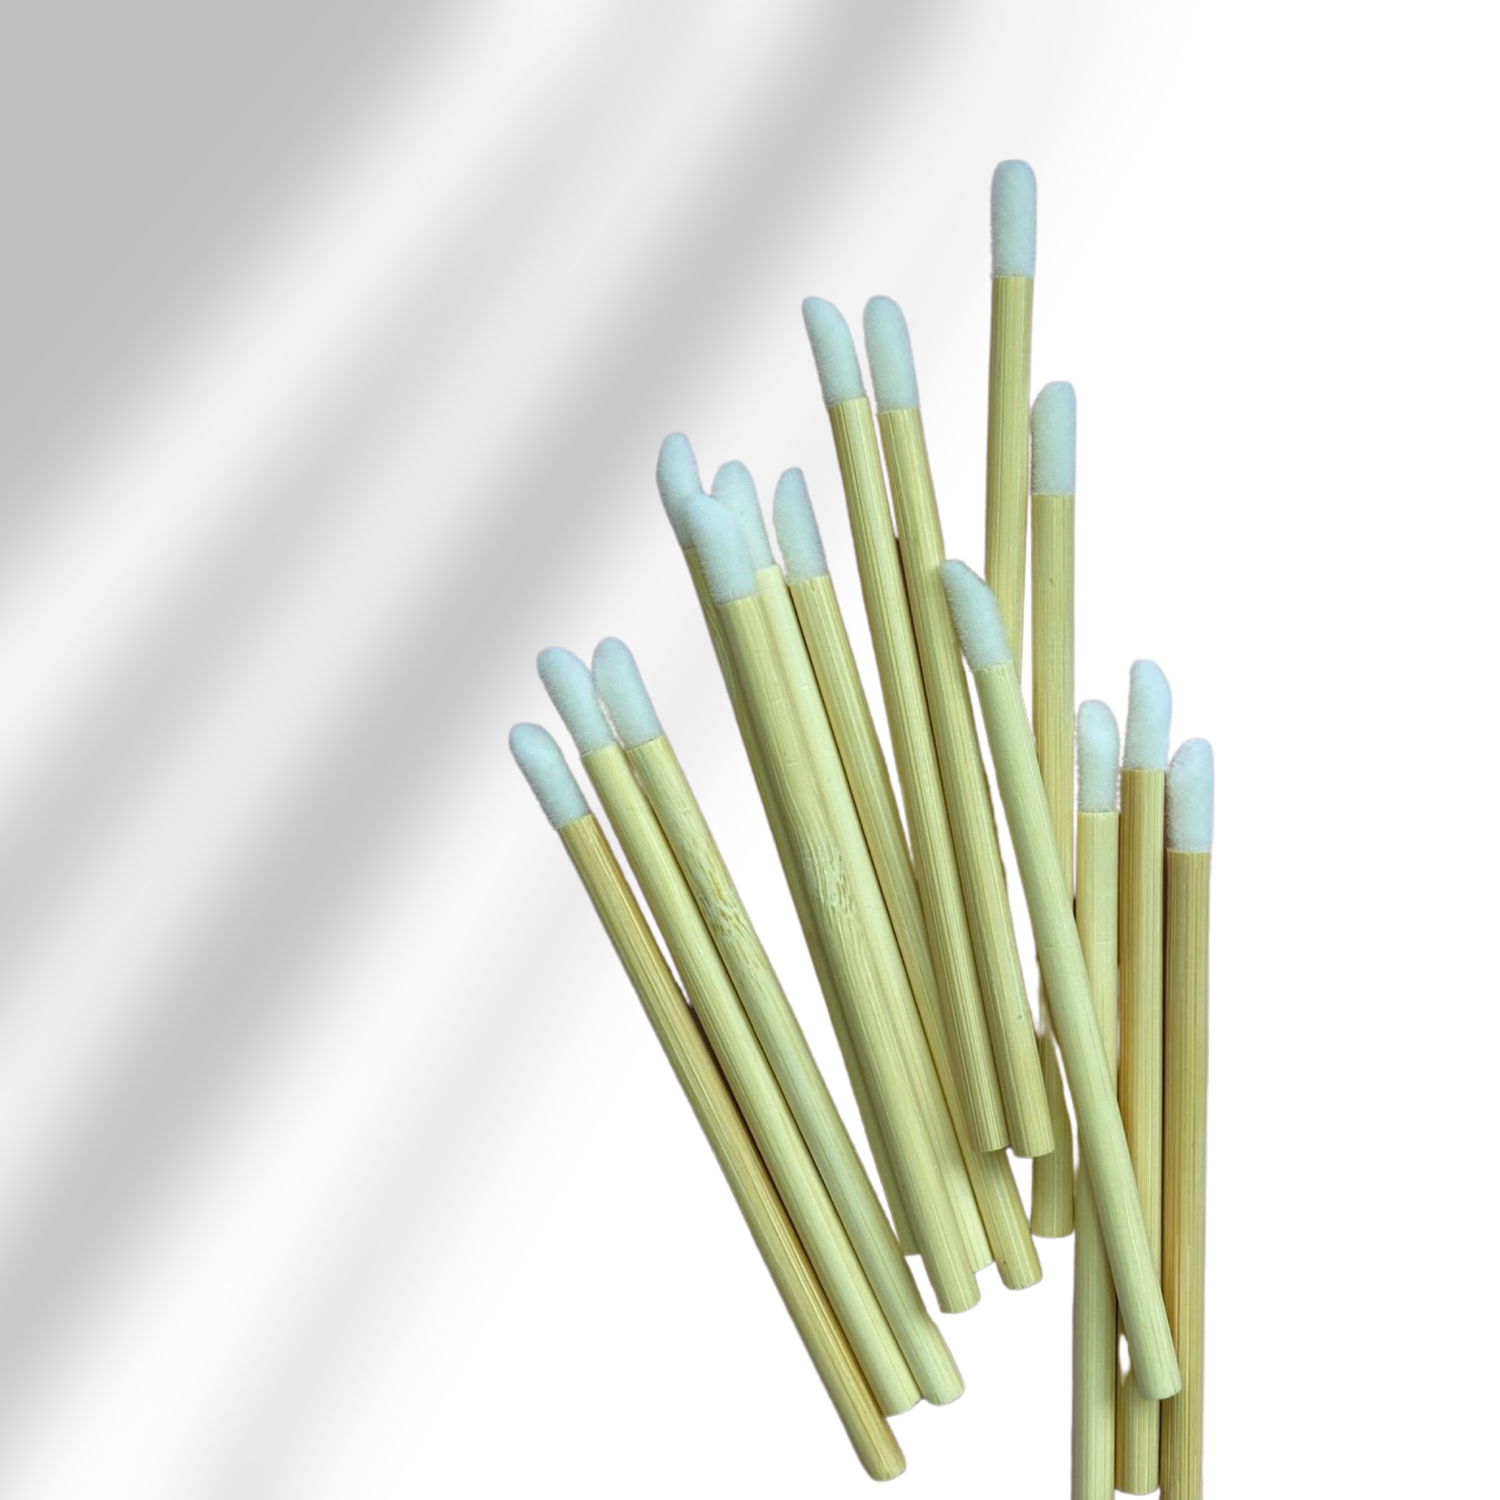 Bamboo disposable lip product application wands laying flat bunched together. 